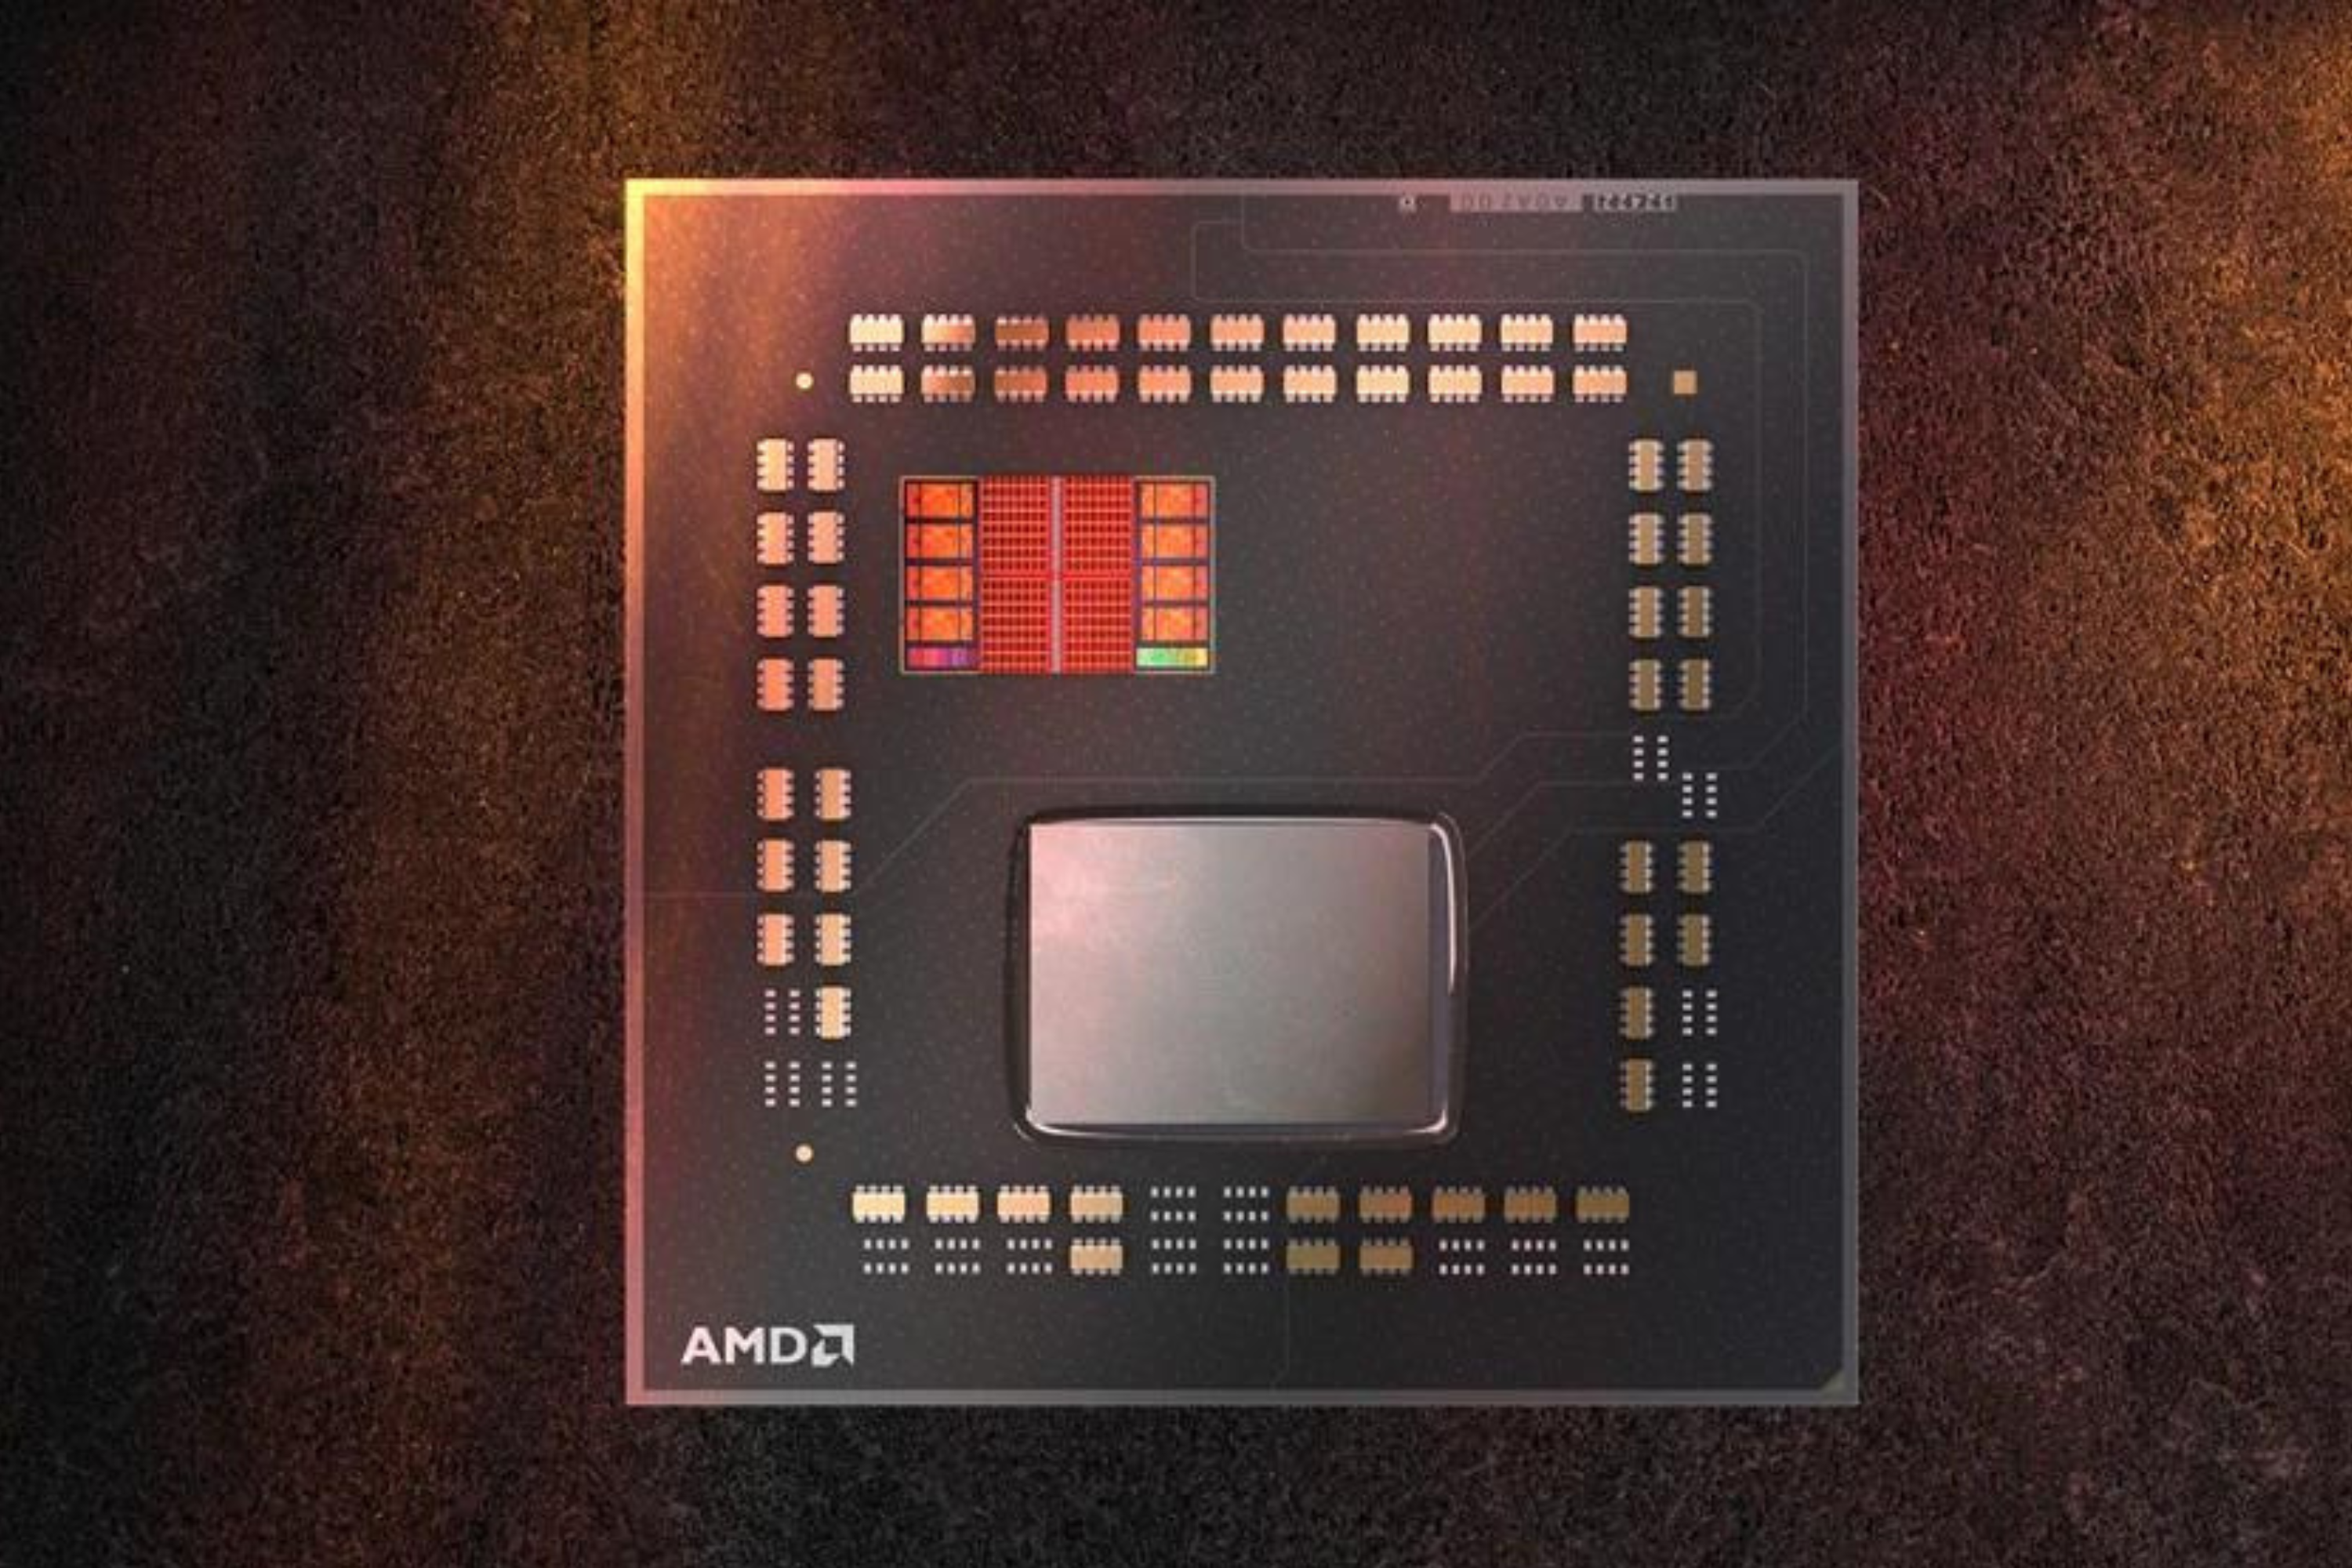 AMD Ryzen 7 5800X3D chip on full display showing details of the actual processor chip